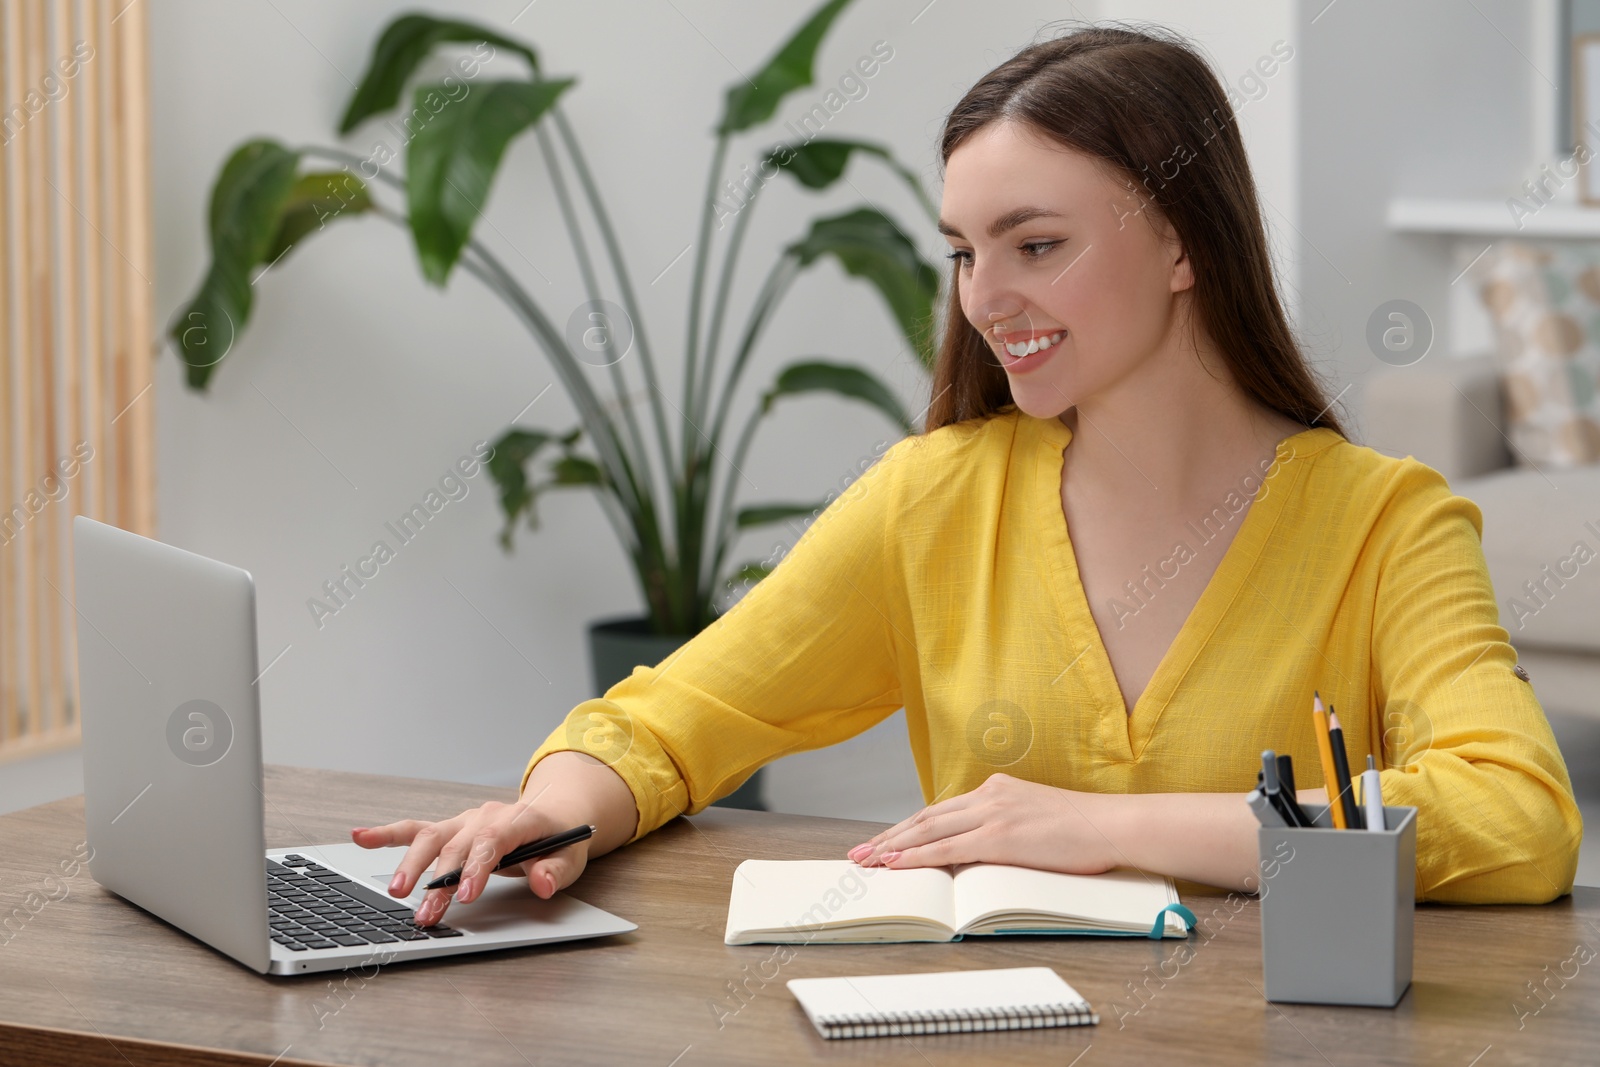 Photo of Happy young woman with notebook working on laptop at wooden table indoors